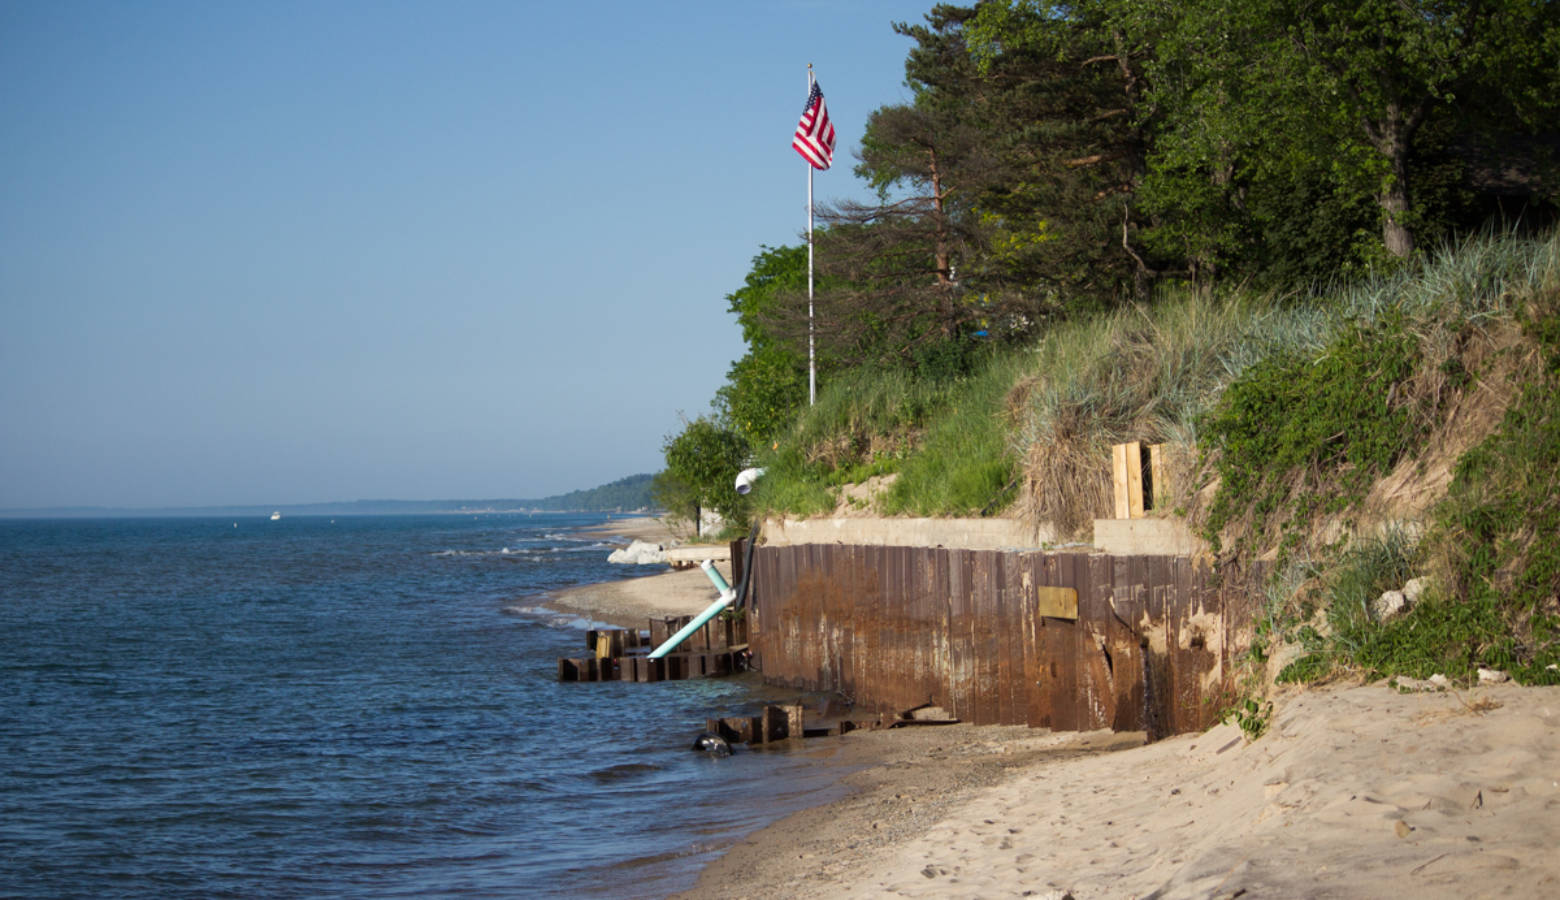 Erosion in Long Beach along Lake Michigan. LBCA attorney Pat Sharkey says, "In Long Beach you used to be able to walk the entire length from grand Beach all the way into downtown Michigan City. You can't do that anymore." (Nick Janzen/IPBS)